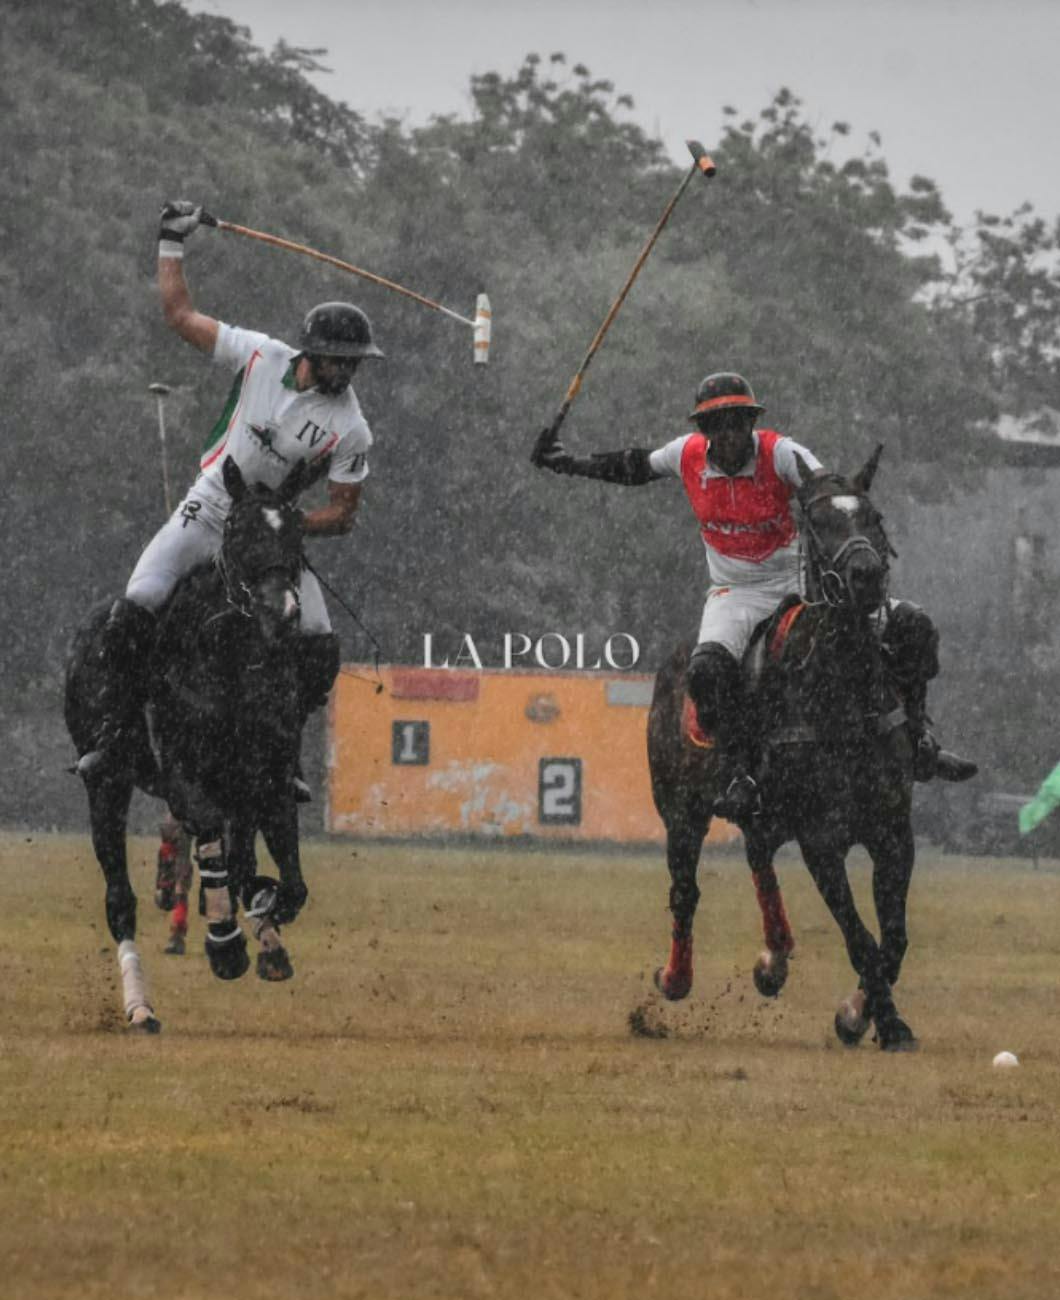 The torrential downpour led V Polo and Bedla/ Los Polistas to cancel the match